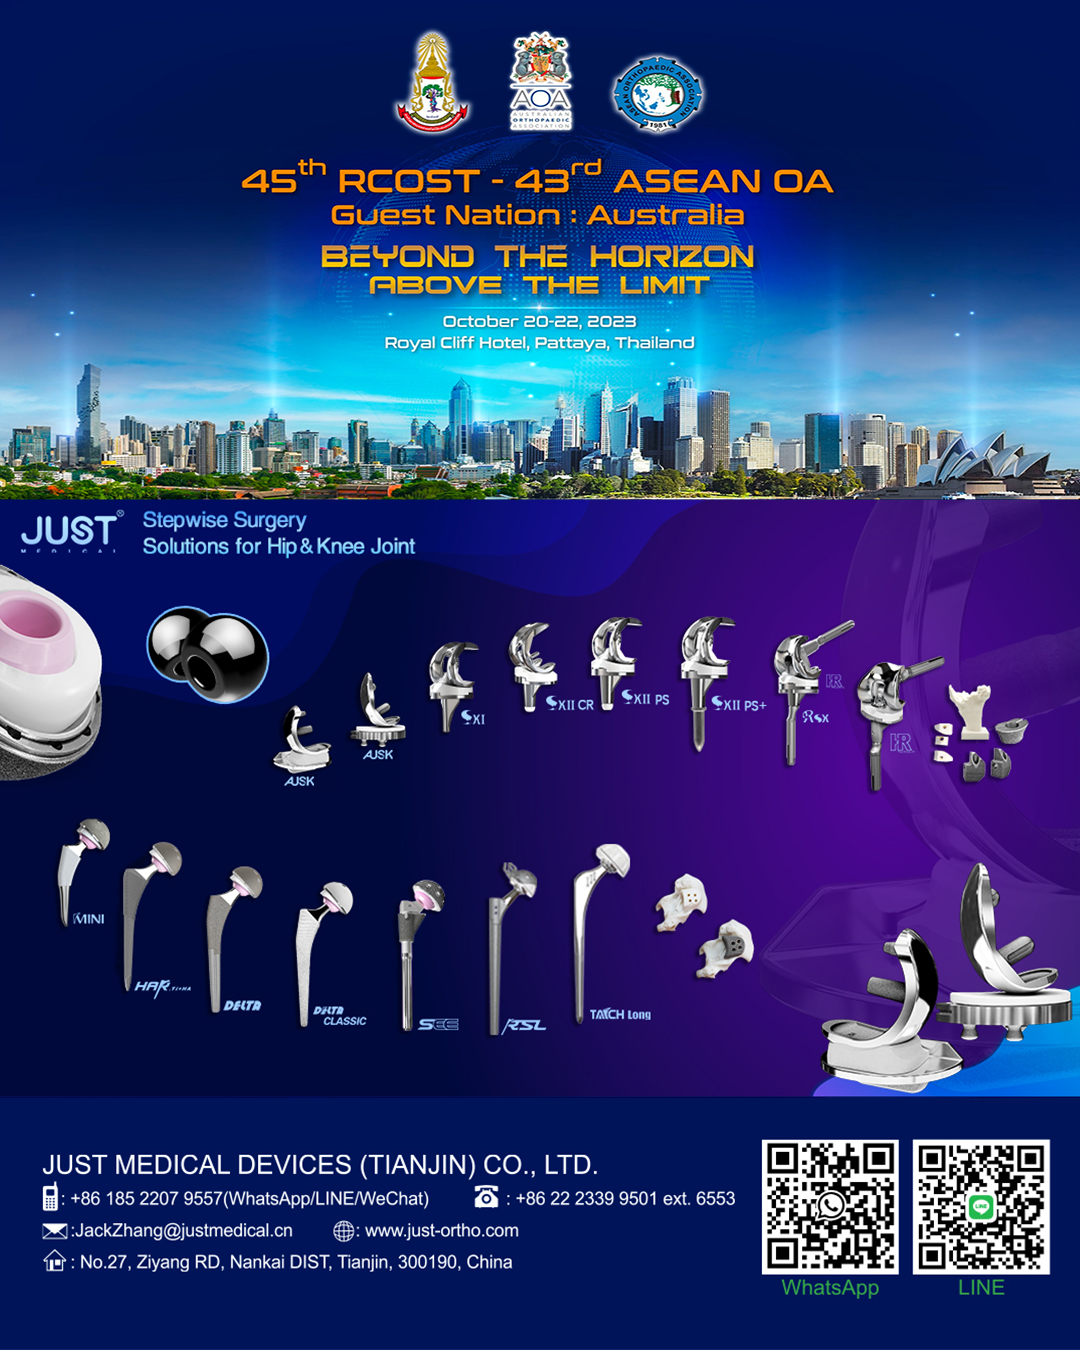 Exciting News! JUST Medical is thrilled to participate in the 45th RCOST Exhibition in Thailand!